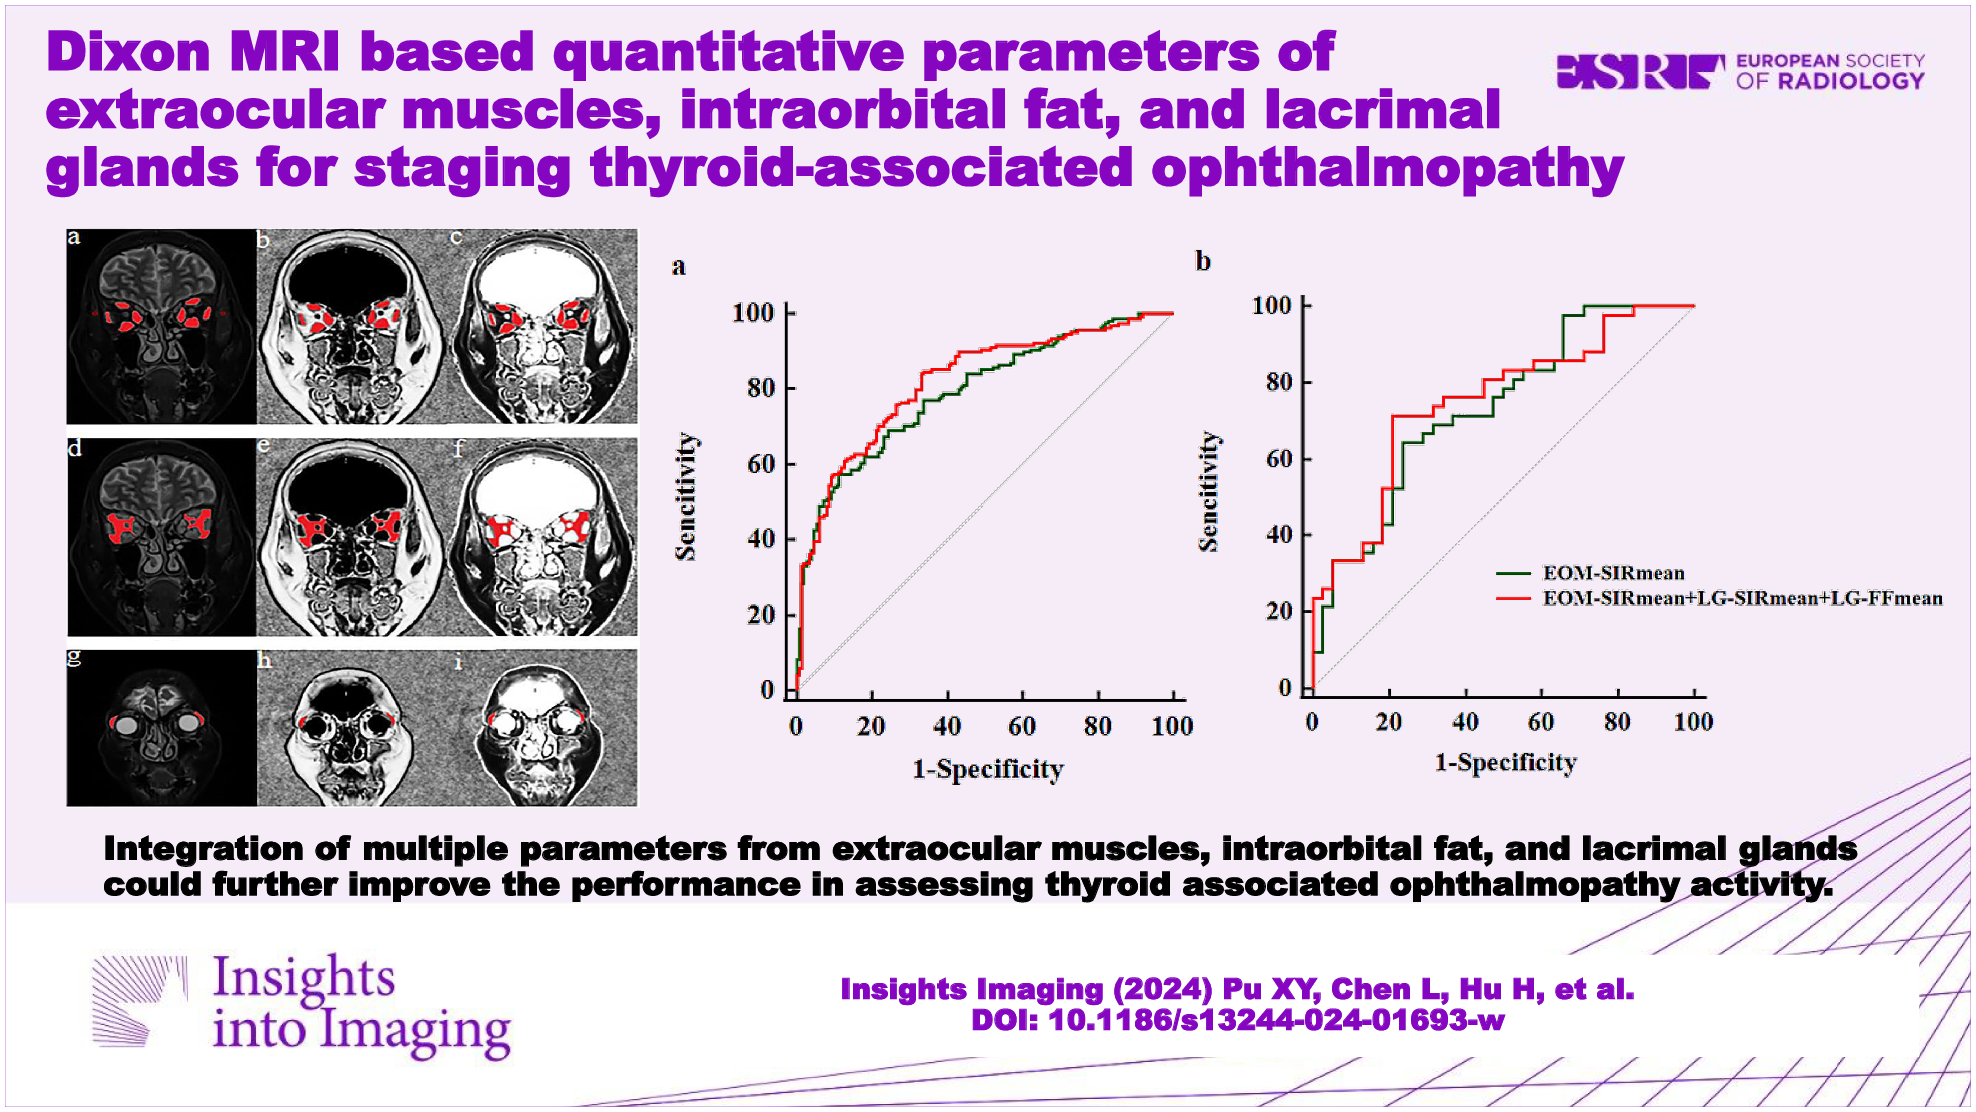 Dixon MRI-based quantitative parameters of extraocular muscles, intraorbital fat, and lacrimal glands for staging thyroid-associated ophthalmopathy